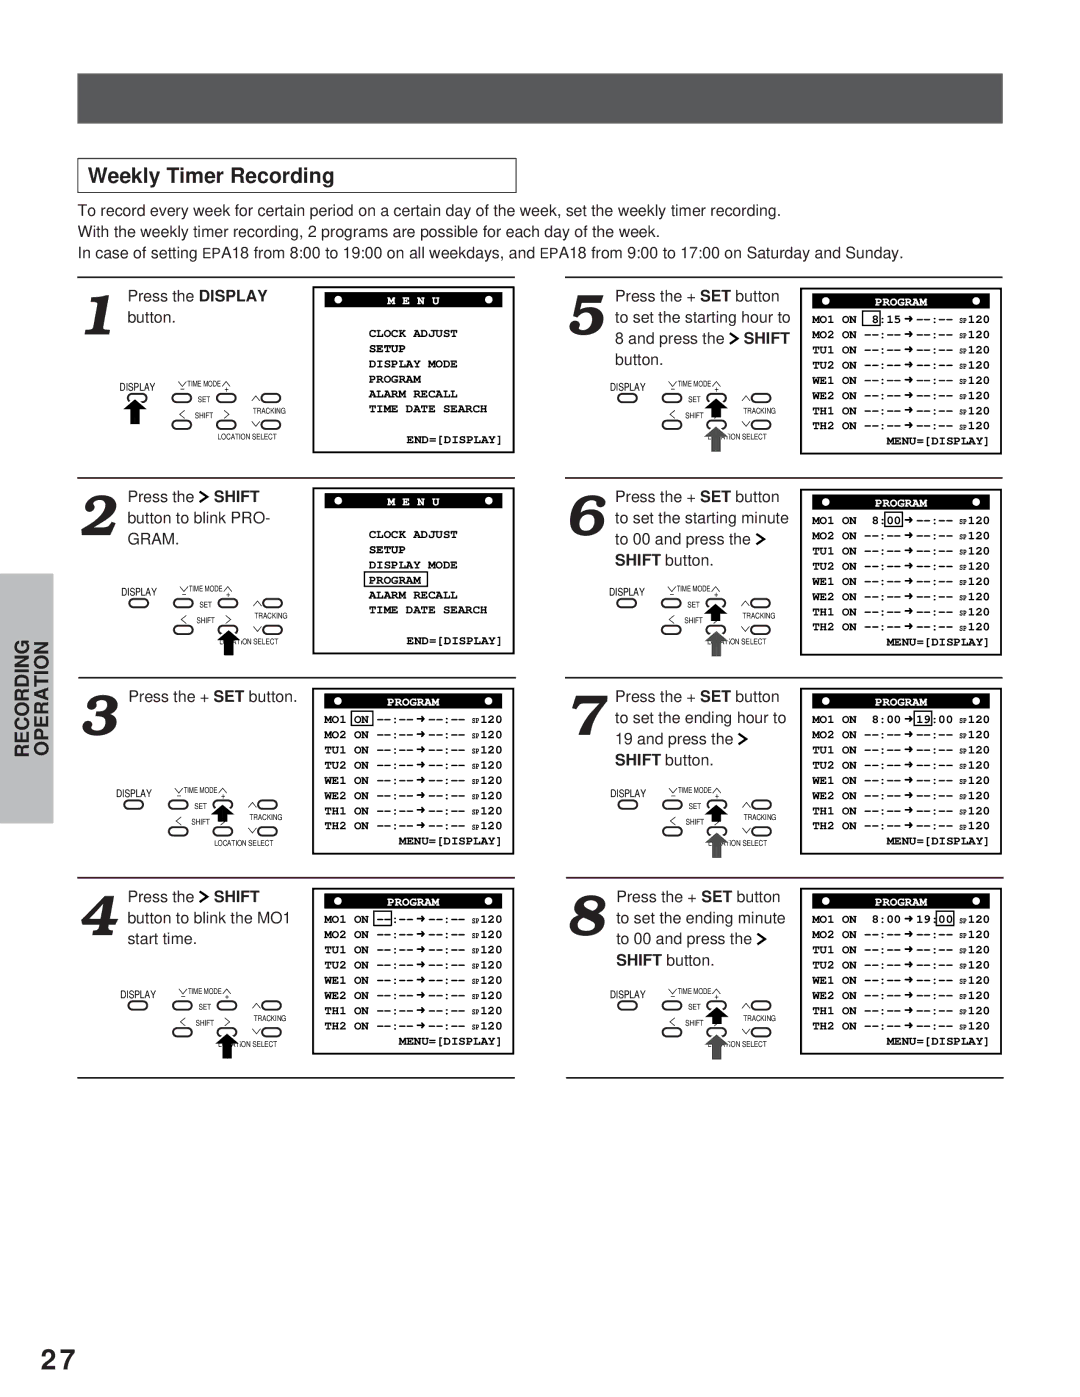 Toshiba kV-9168A instruction manual Weekly Timer Recording, Press the Shift ButtonGRAM.to blink PRO 